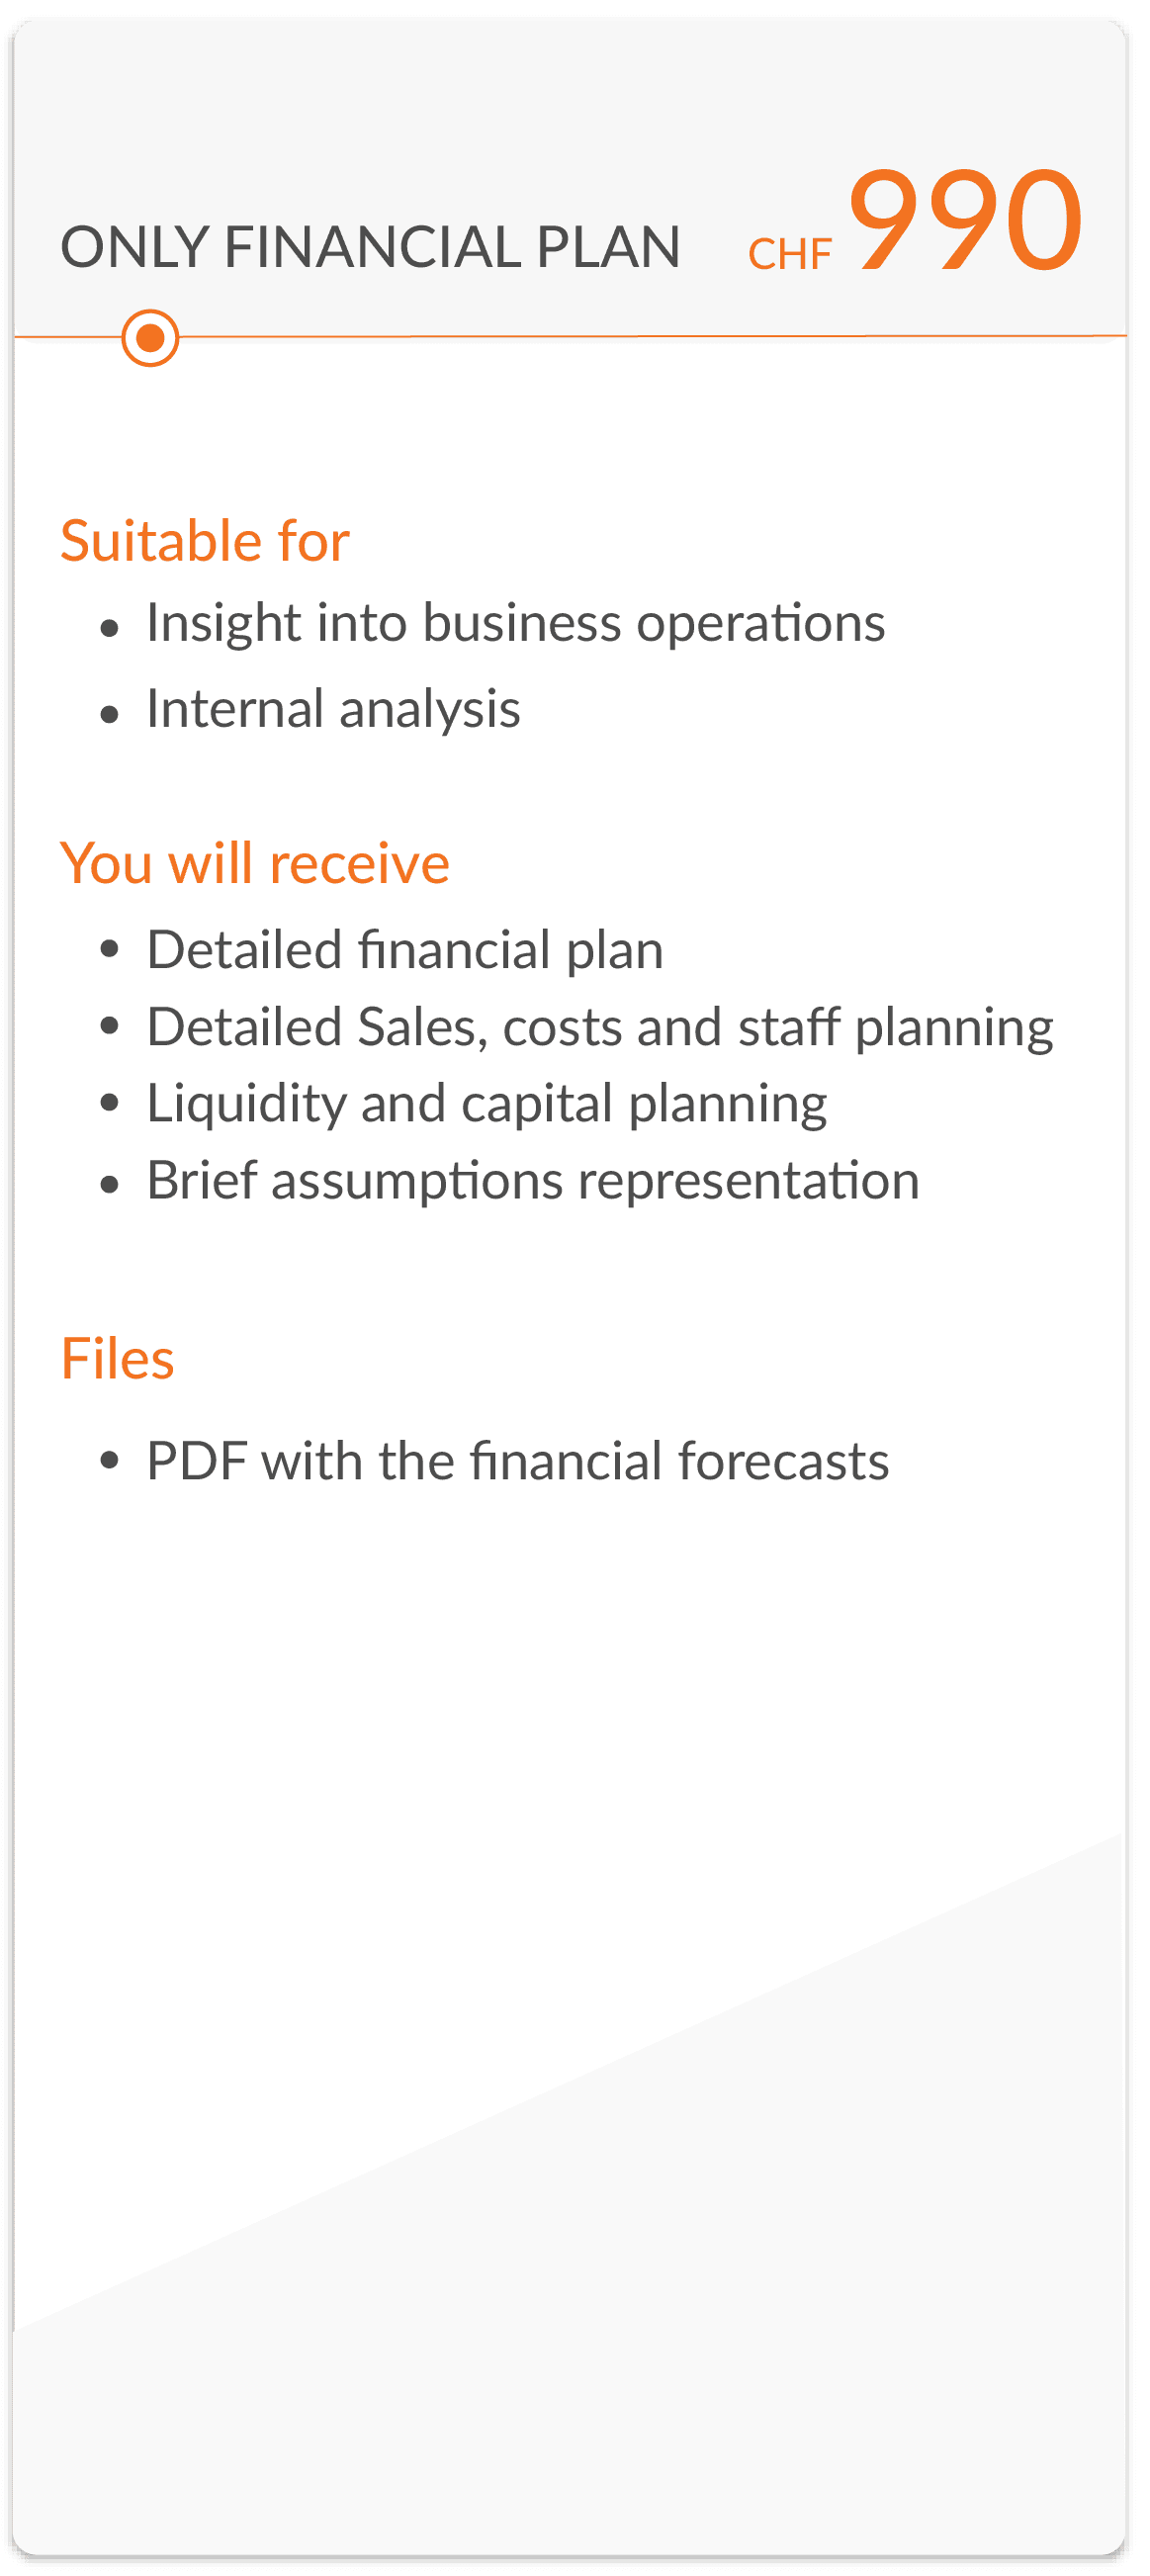 Only financial plan - CHF 990